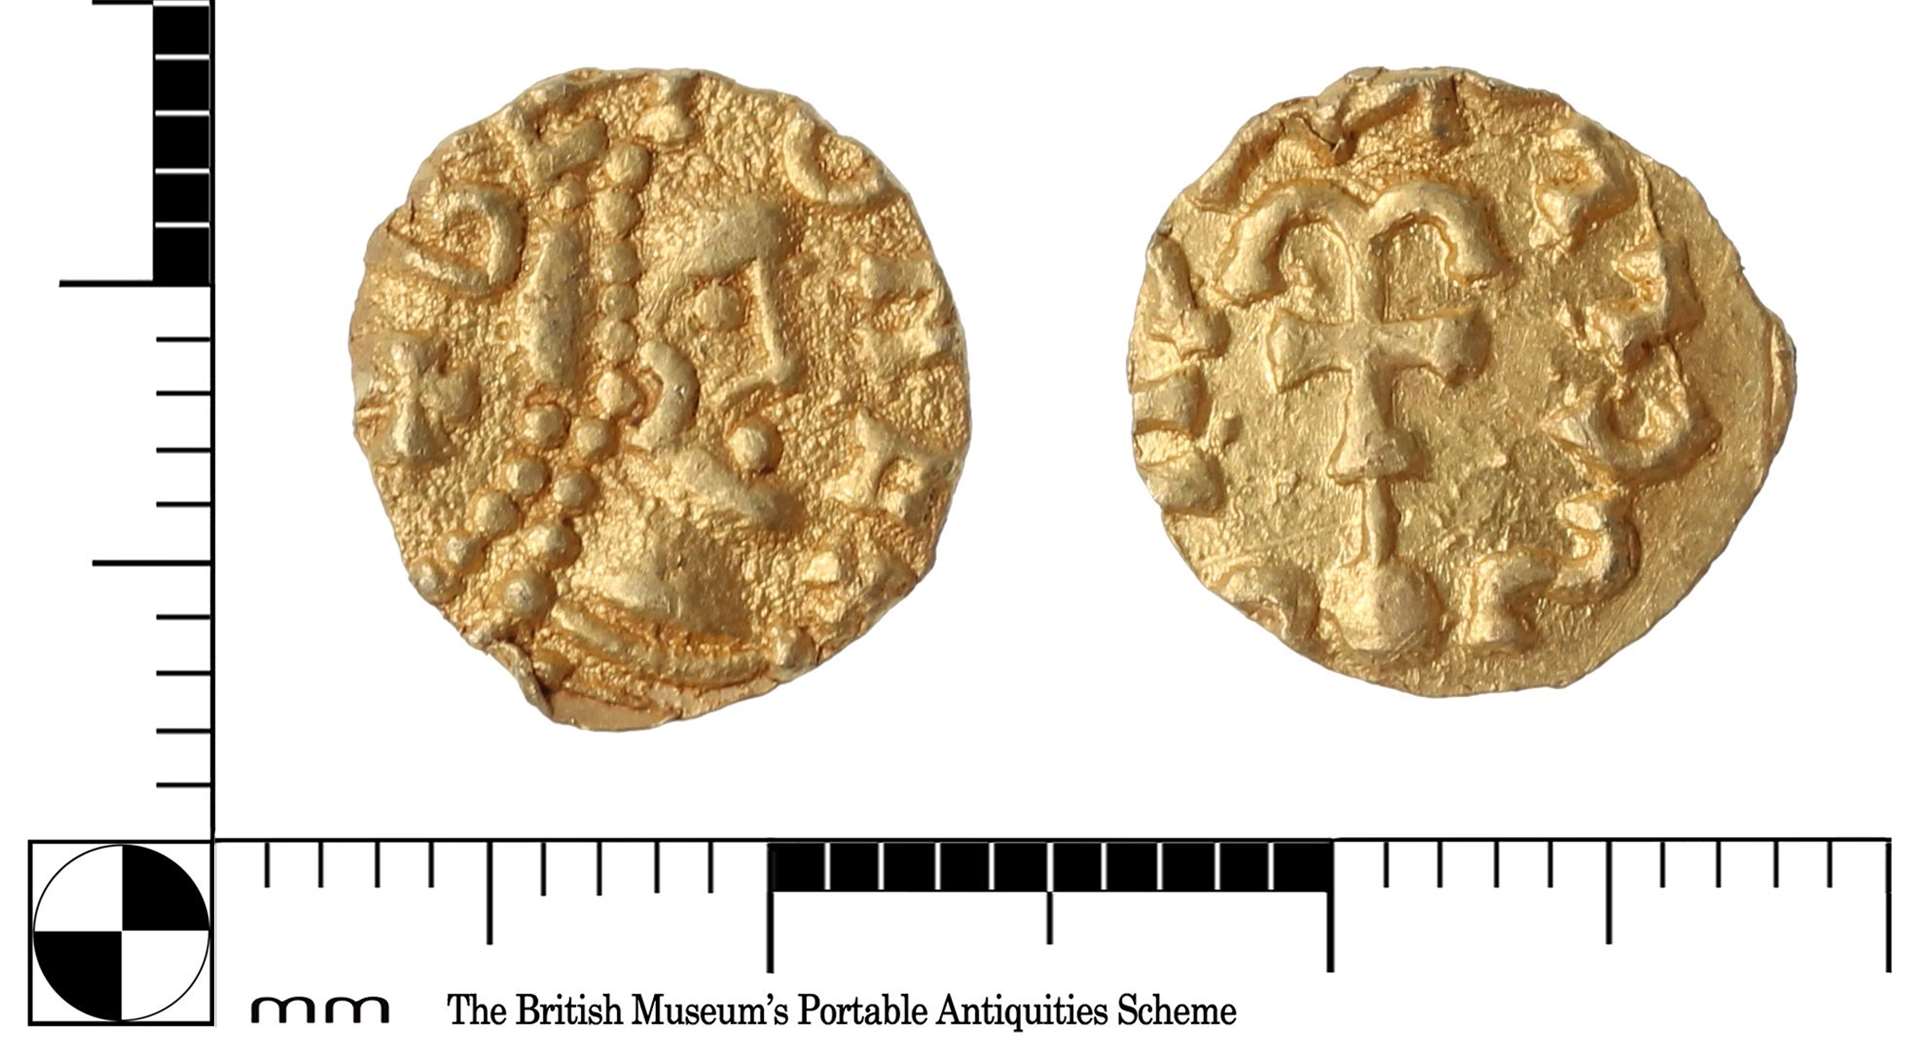 Coin 1: One of two early-medieval Merovingian gold tremissis found near East Peckham. Image: Jo Ahmet KCC finds officer